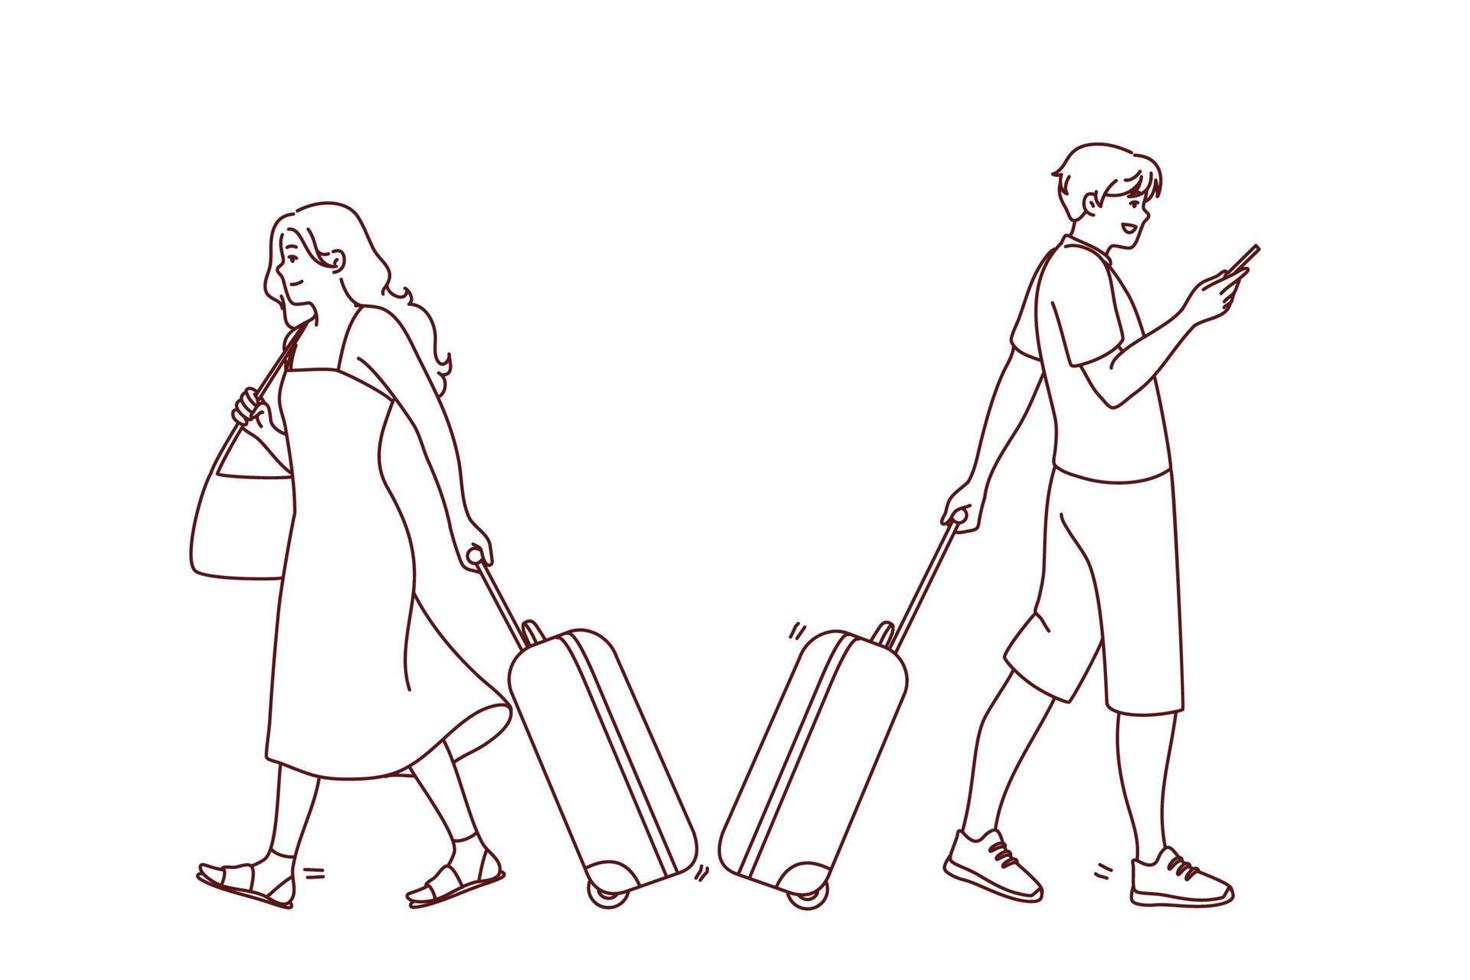 People with suitcases ready to travel in airport. Smiling tourist with baggage before vacation. Tourism and holidays. Vector illustration.